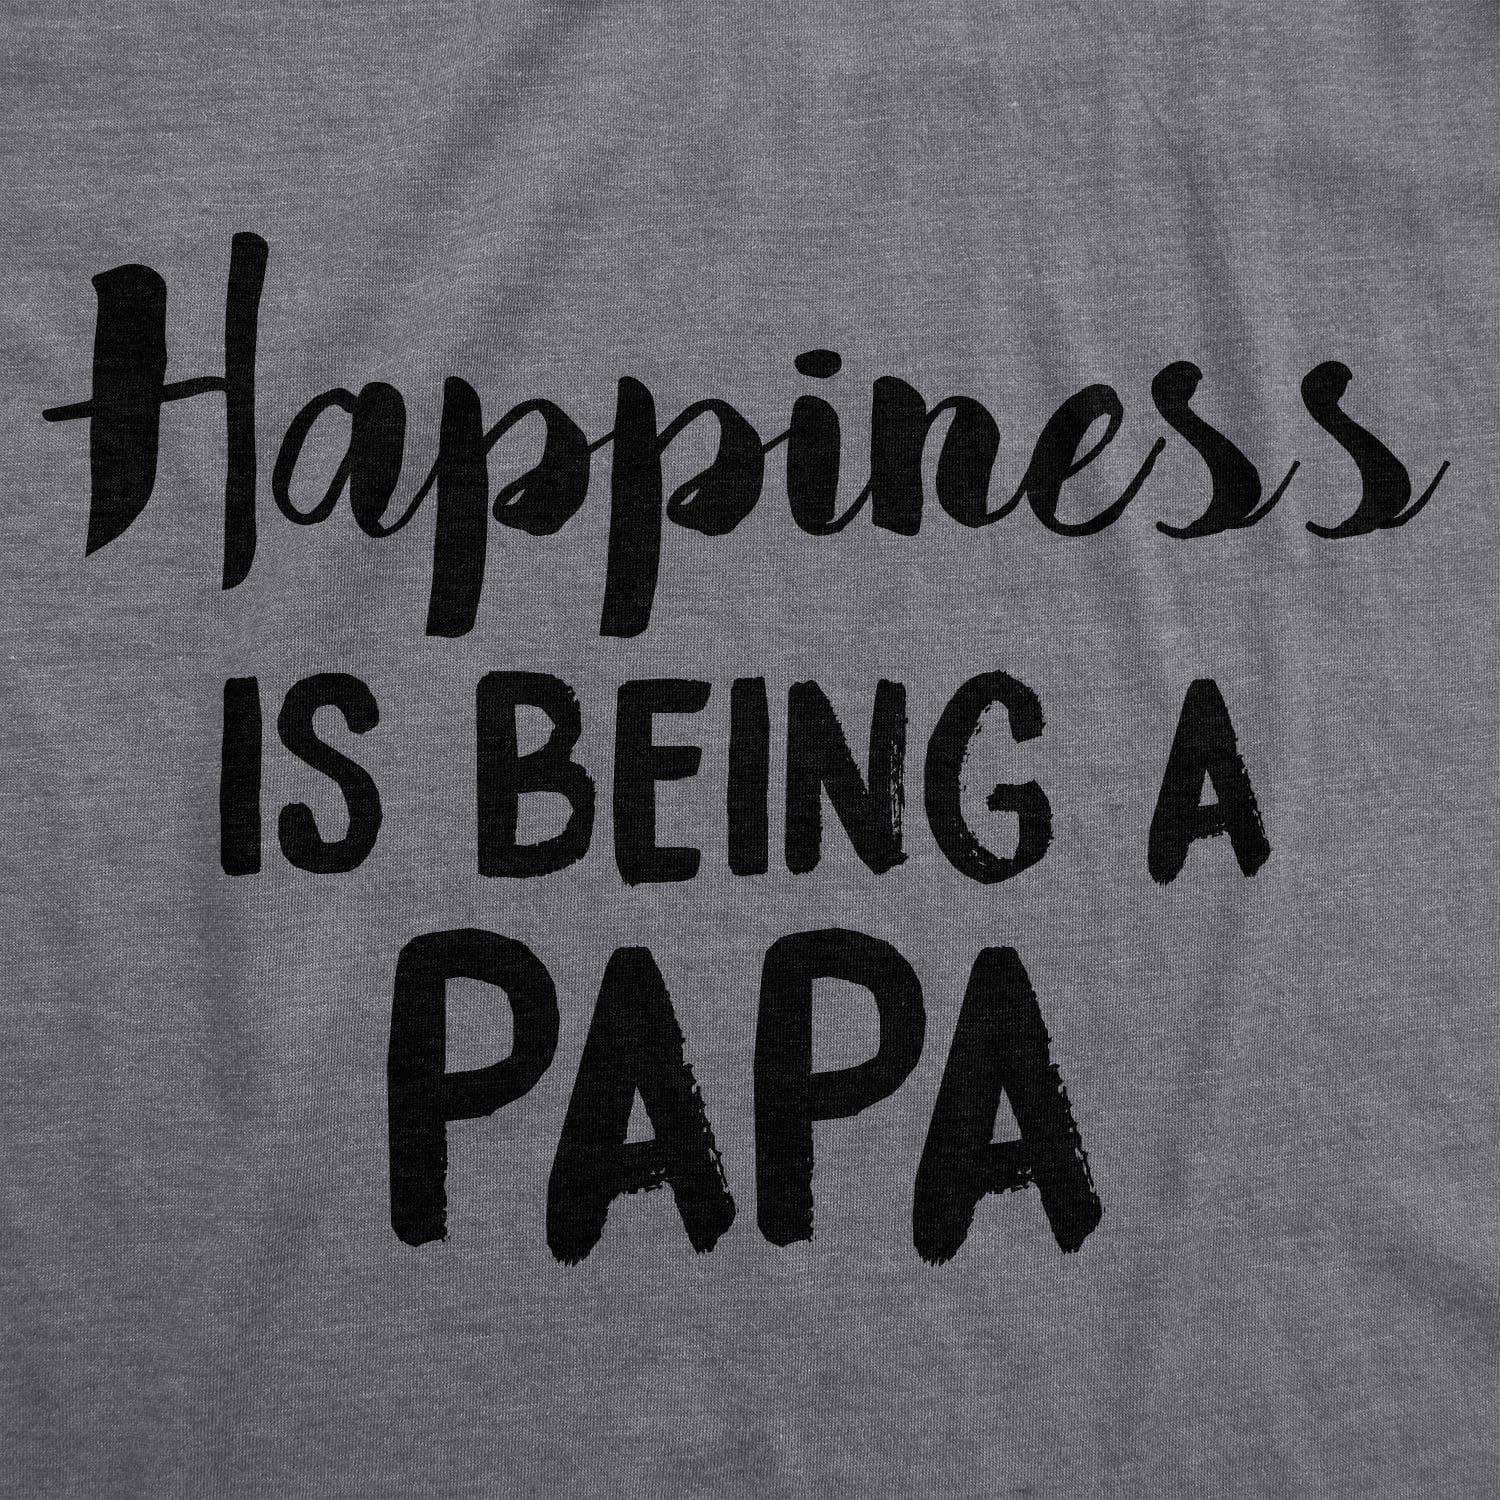 Happiness Is Being a Papa Men's Tshirt  -  Crazy Dog T-Shirts